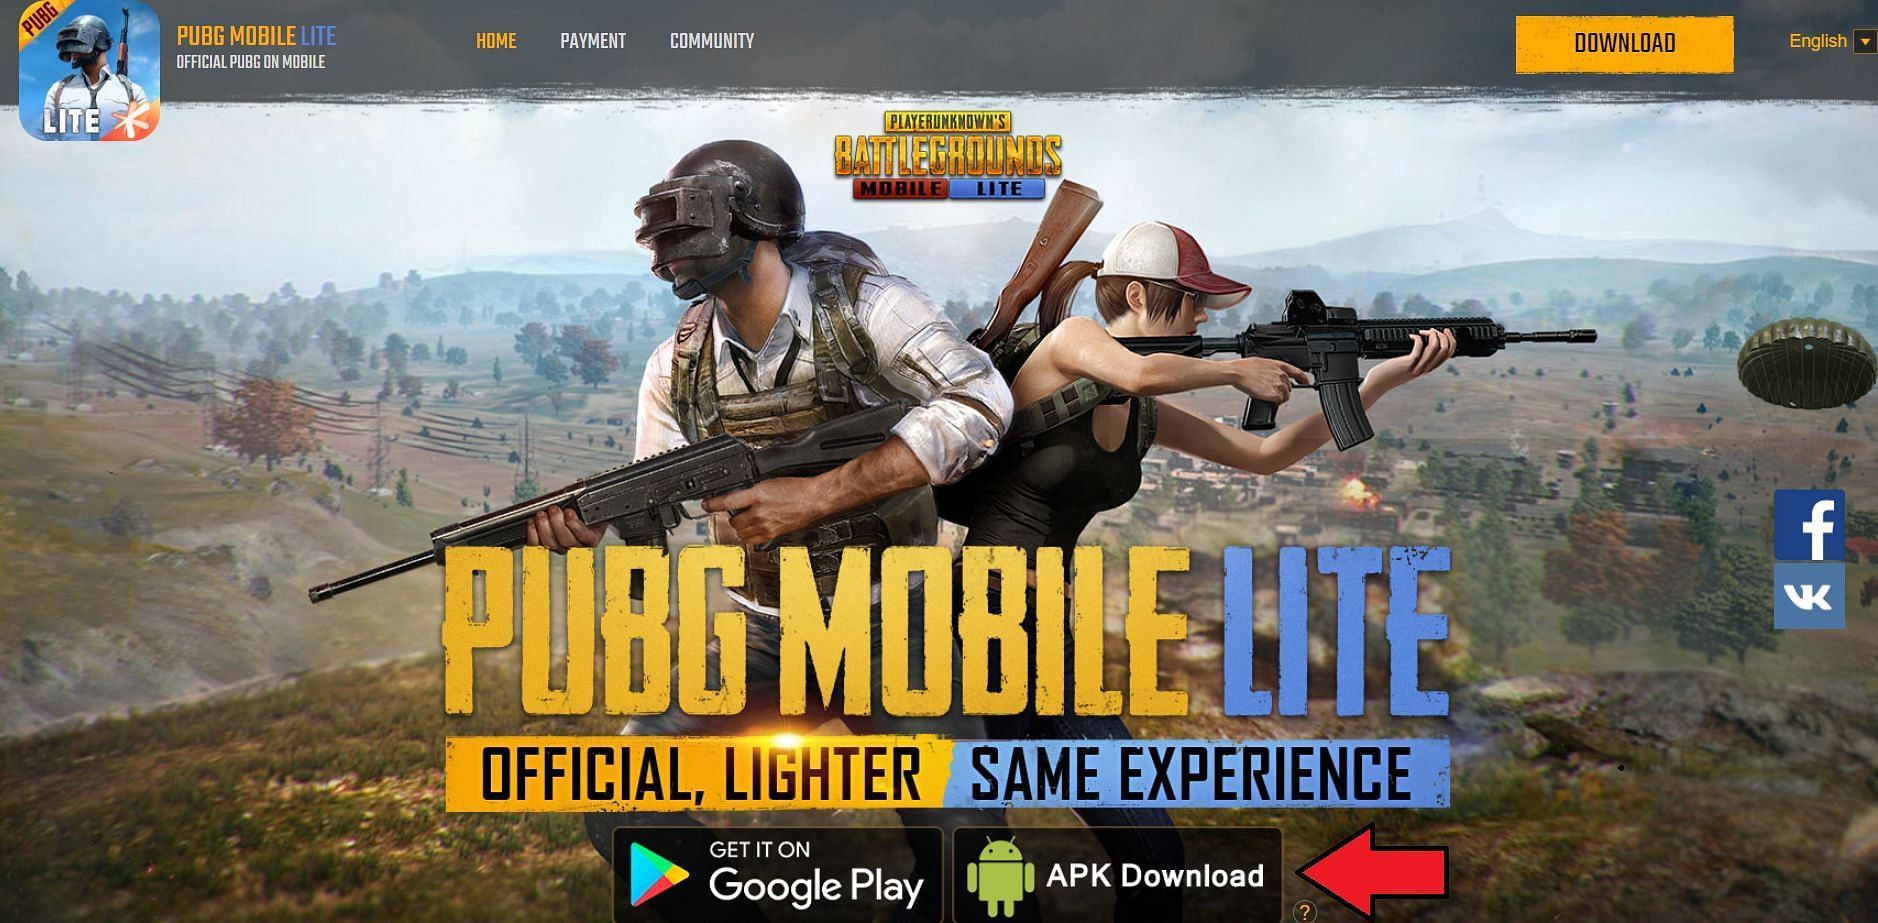 This is the button that gamers must press to start the download (Image via PUBG Mobile Lite)